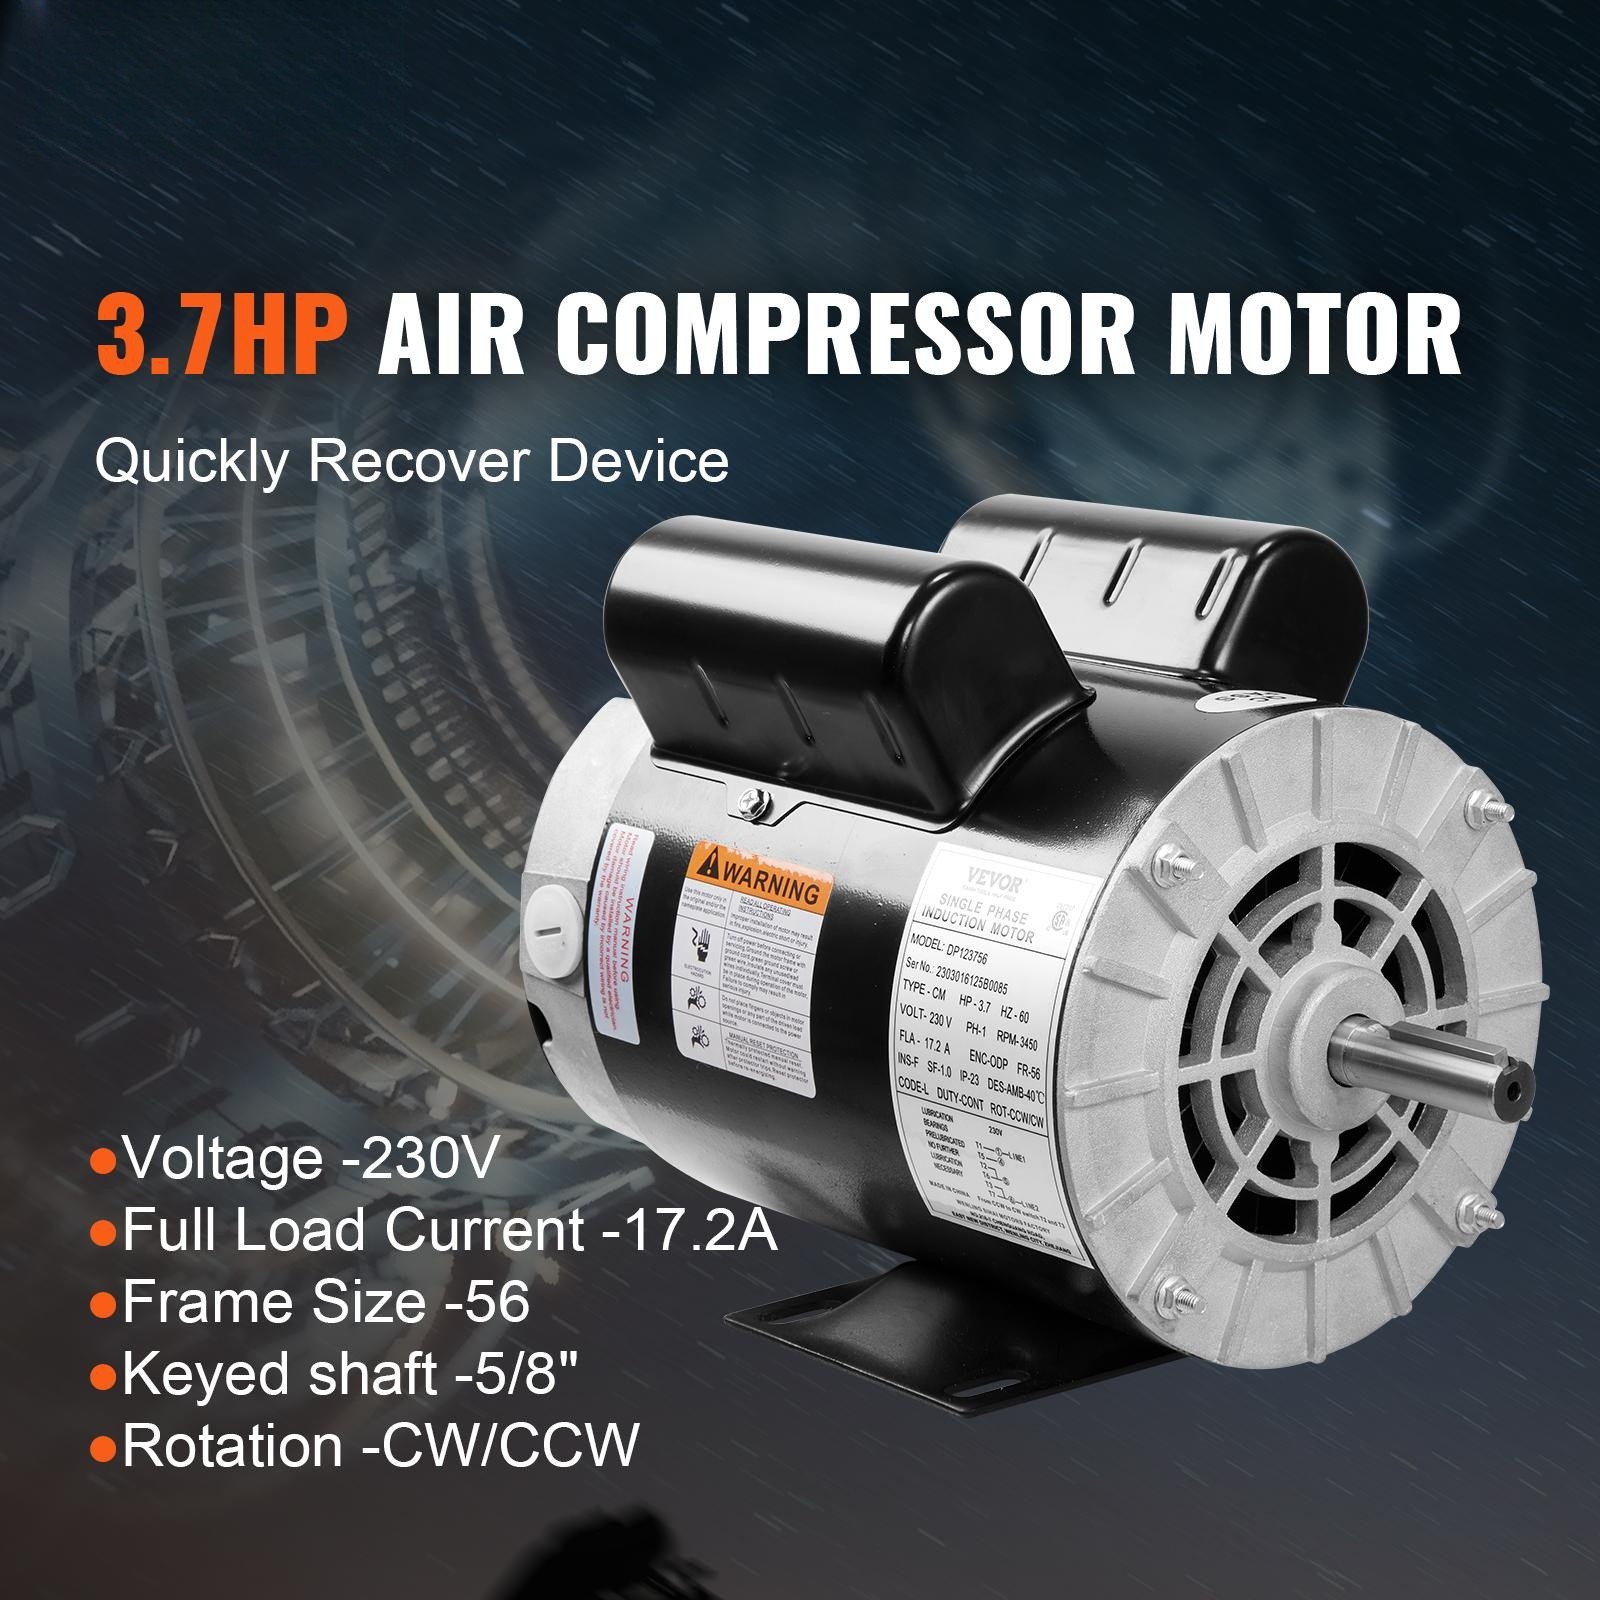 BENTISM 3.7HP Air Compressor Electric Motor, 230V 17.2Amps, 56 Frame 3450RPM, 5/8" Keyed Shaft, CW/CCW Rotation, 1.88" Shaft Length for Air Compressors Has Obtained CSA Certification - image 2 of 9